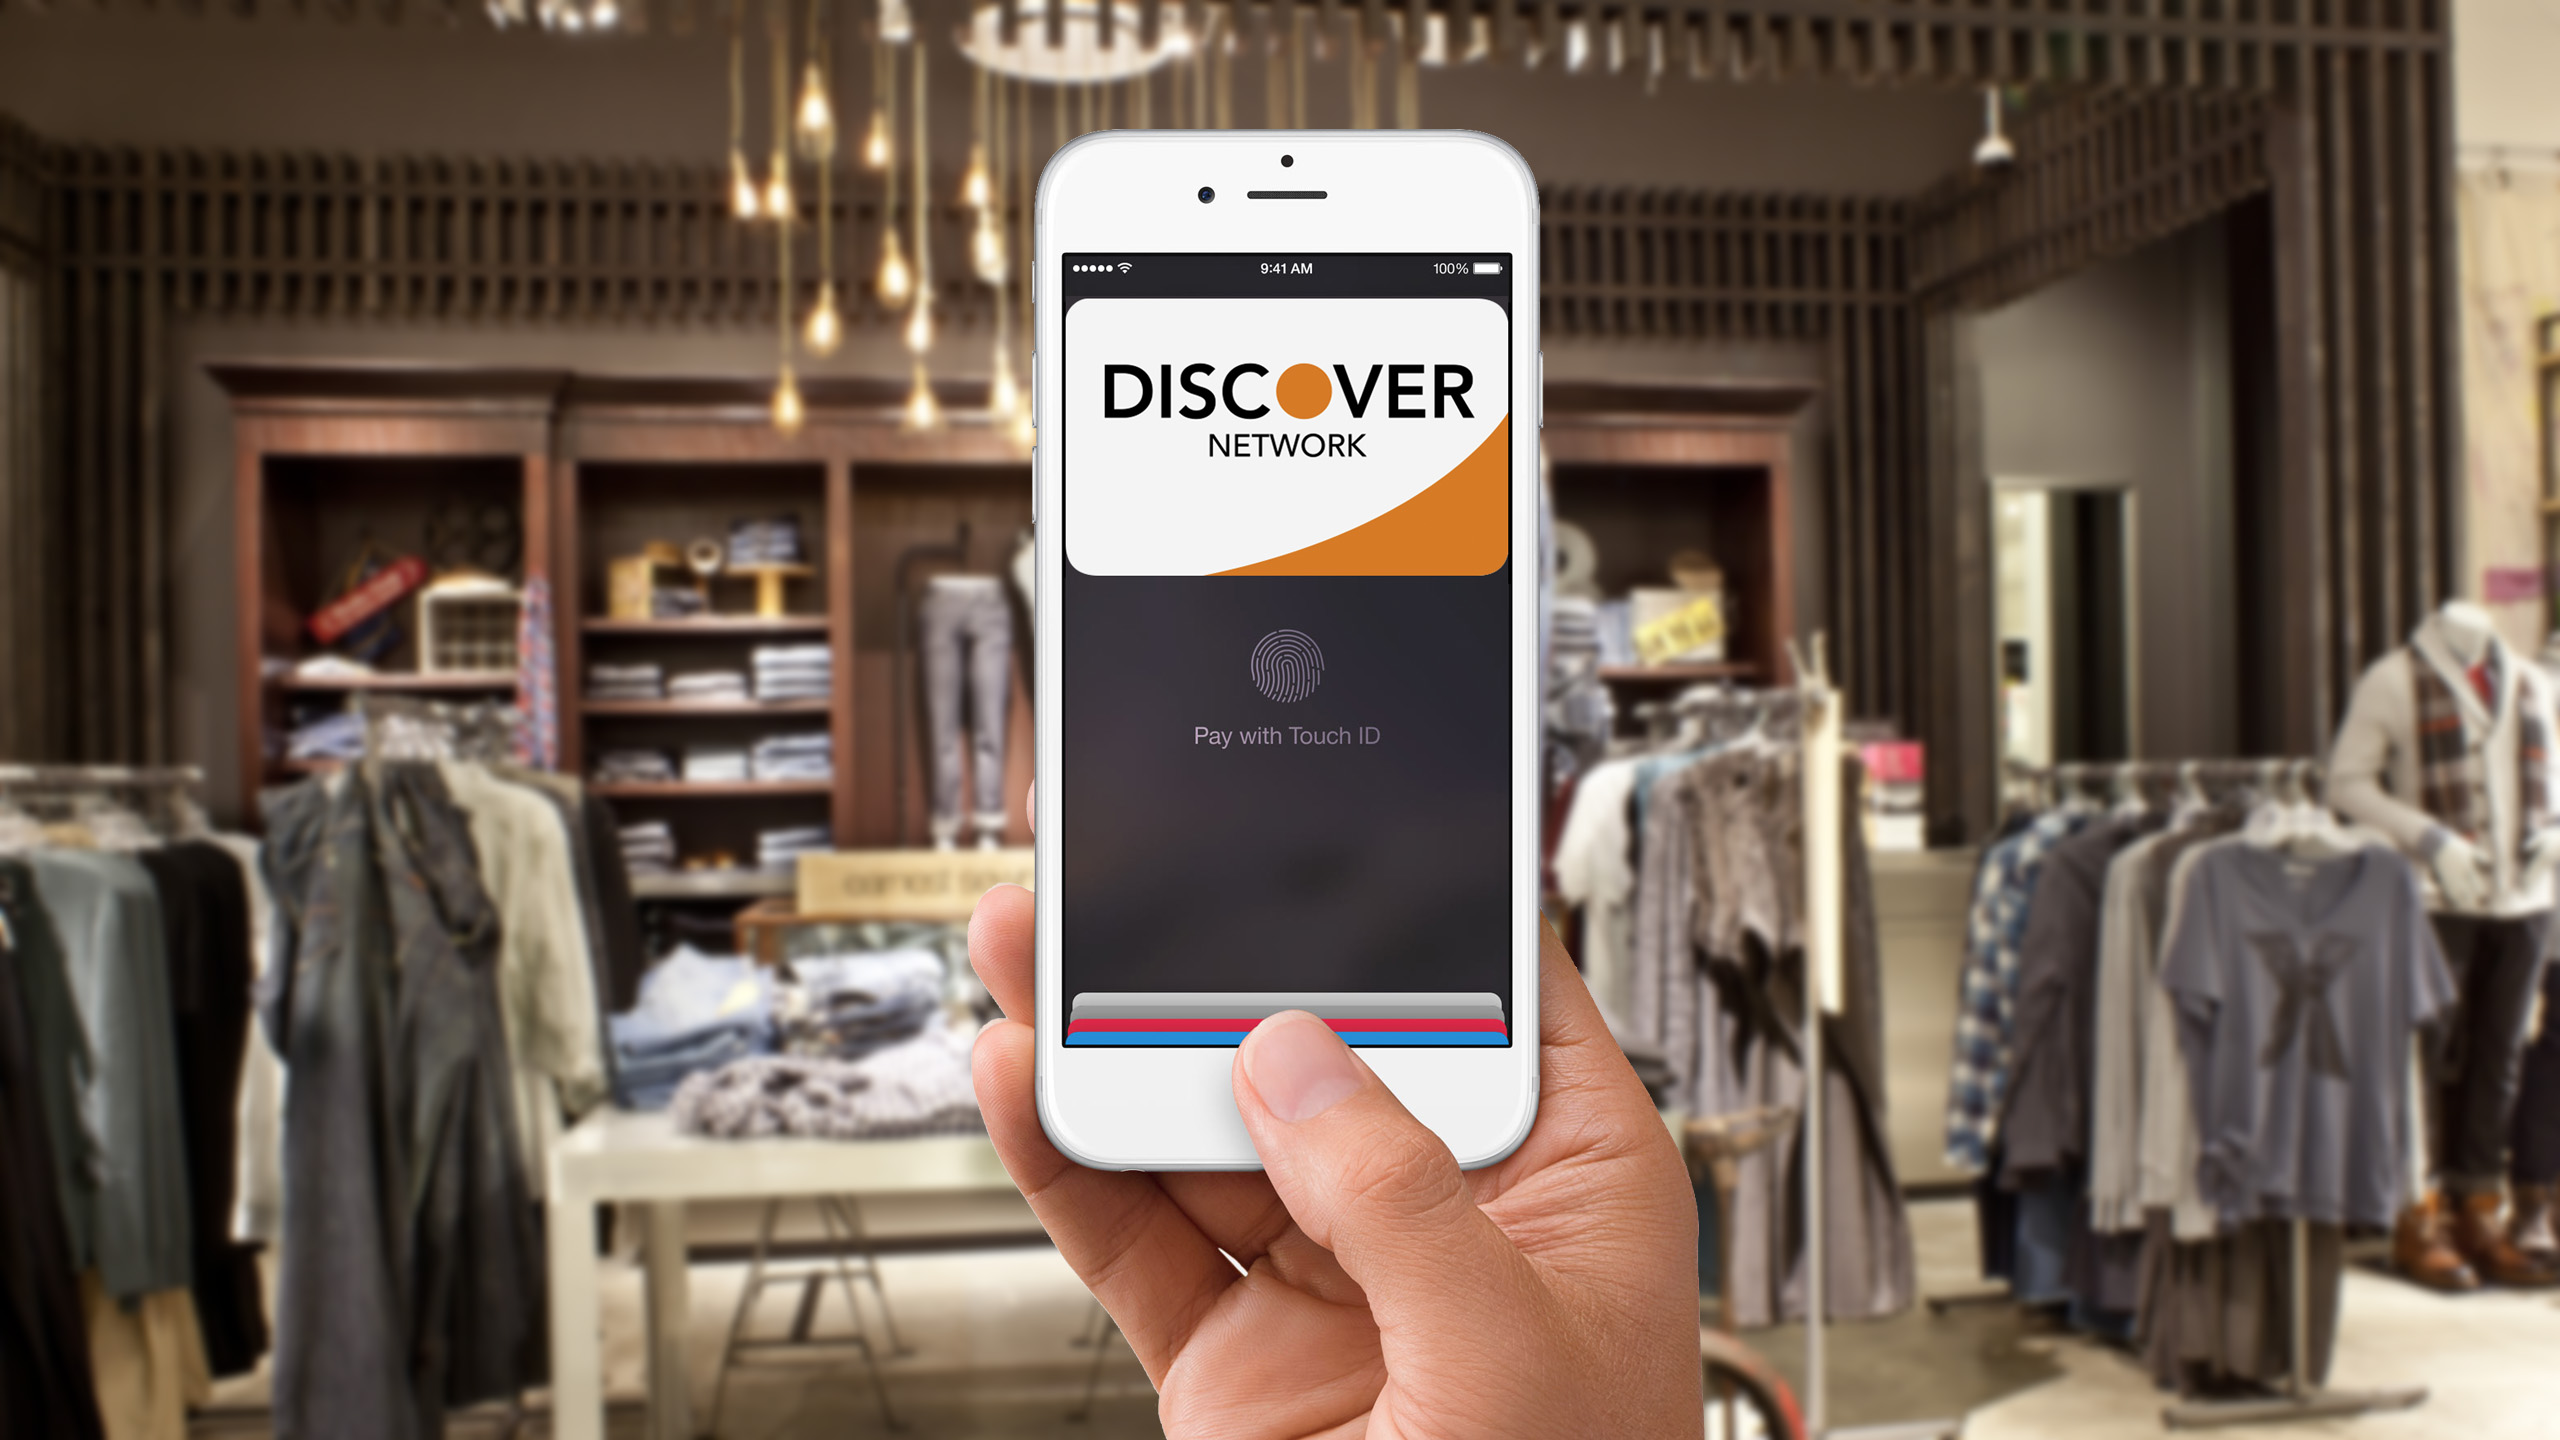 Discover to Support Apple Pay Starting September 16th With 10% Cashback Offer